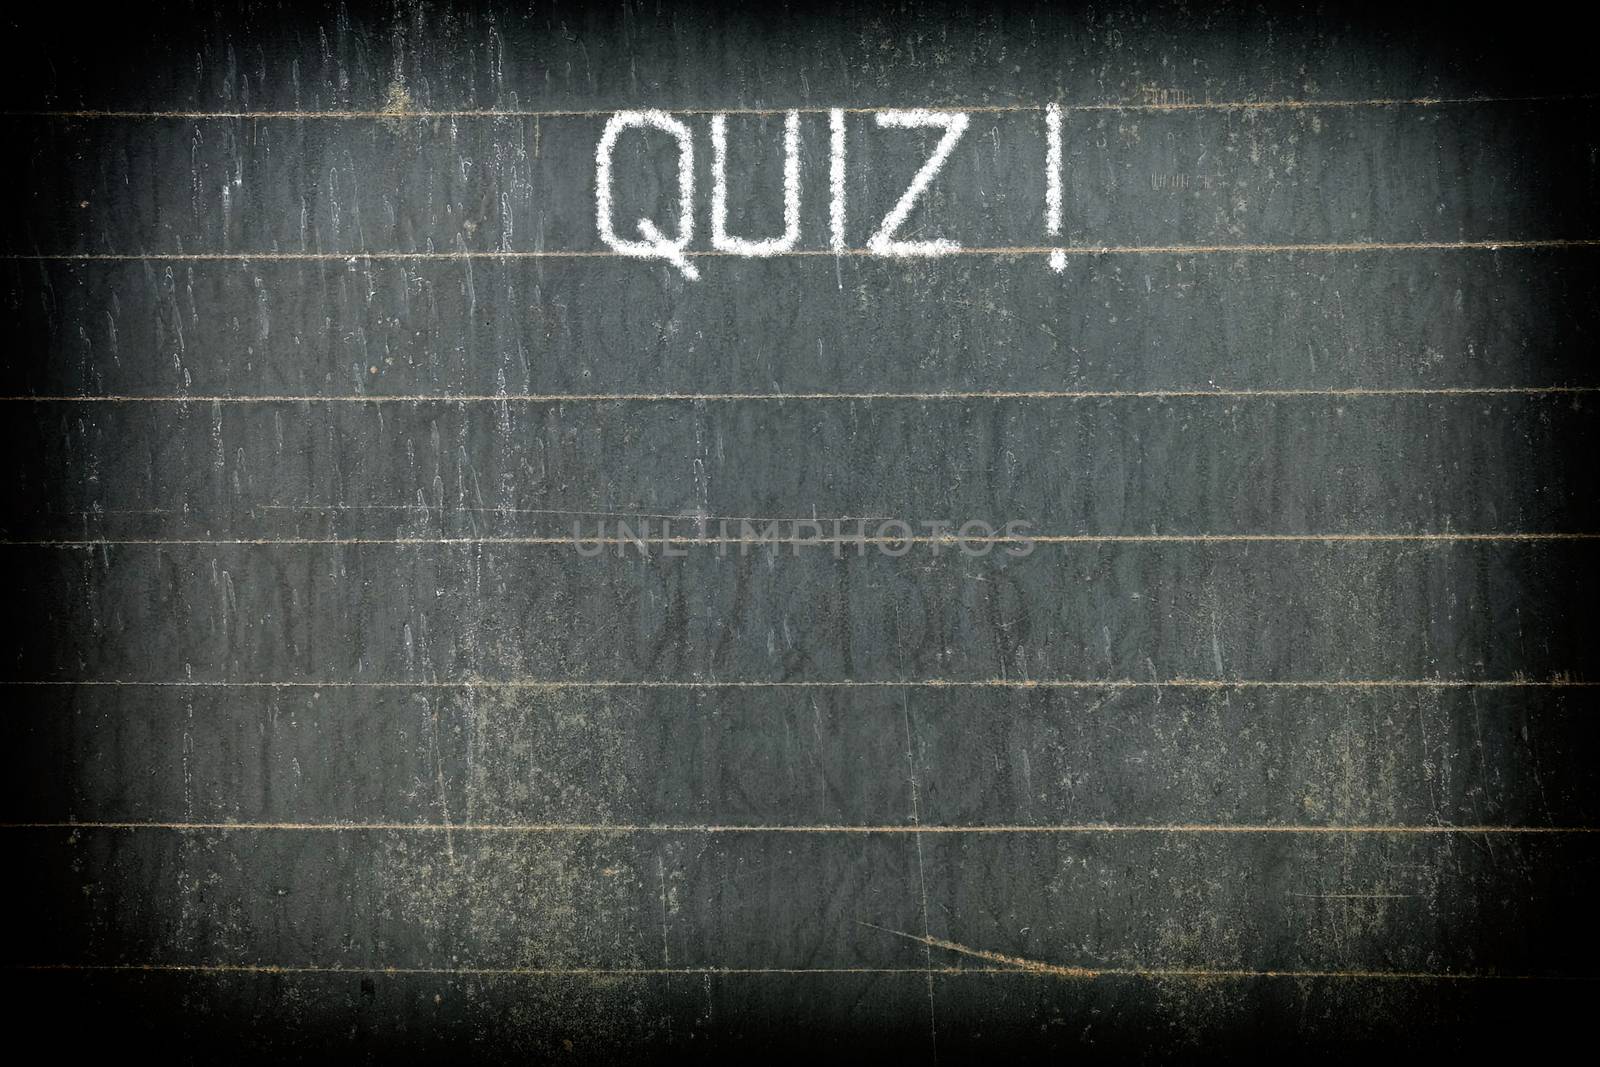 "QUIZ !" Chalk Writing on Old Chalkboard Background. by mesamong